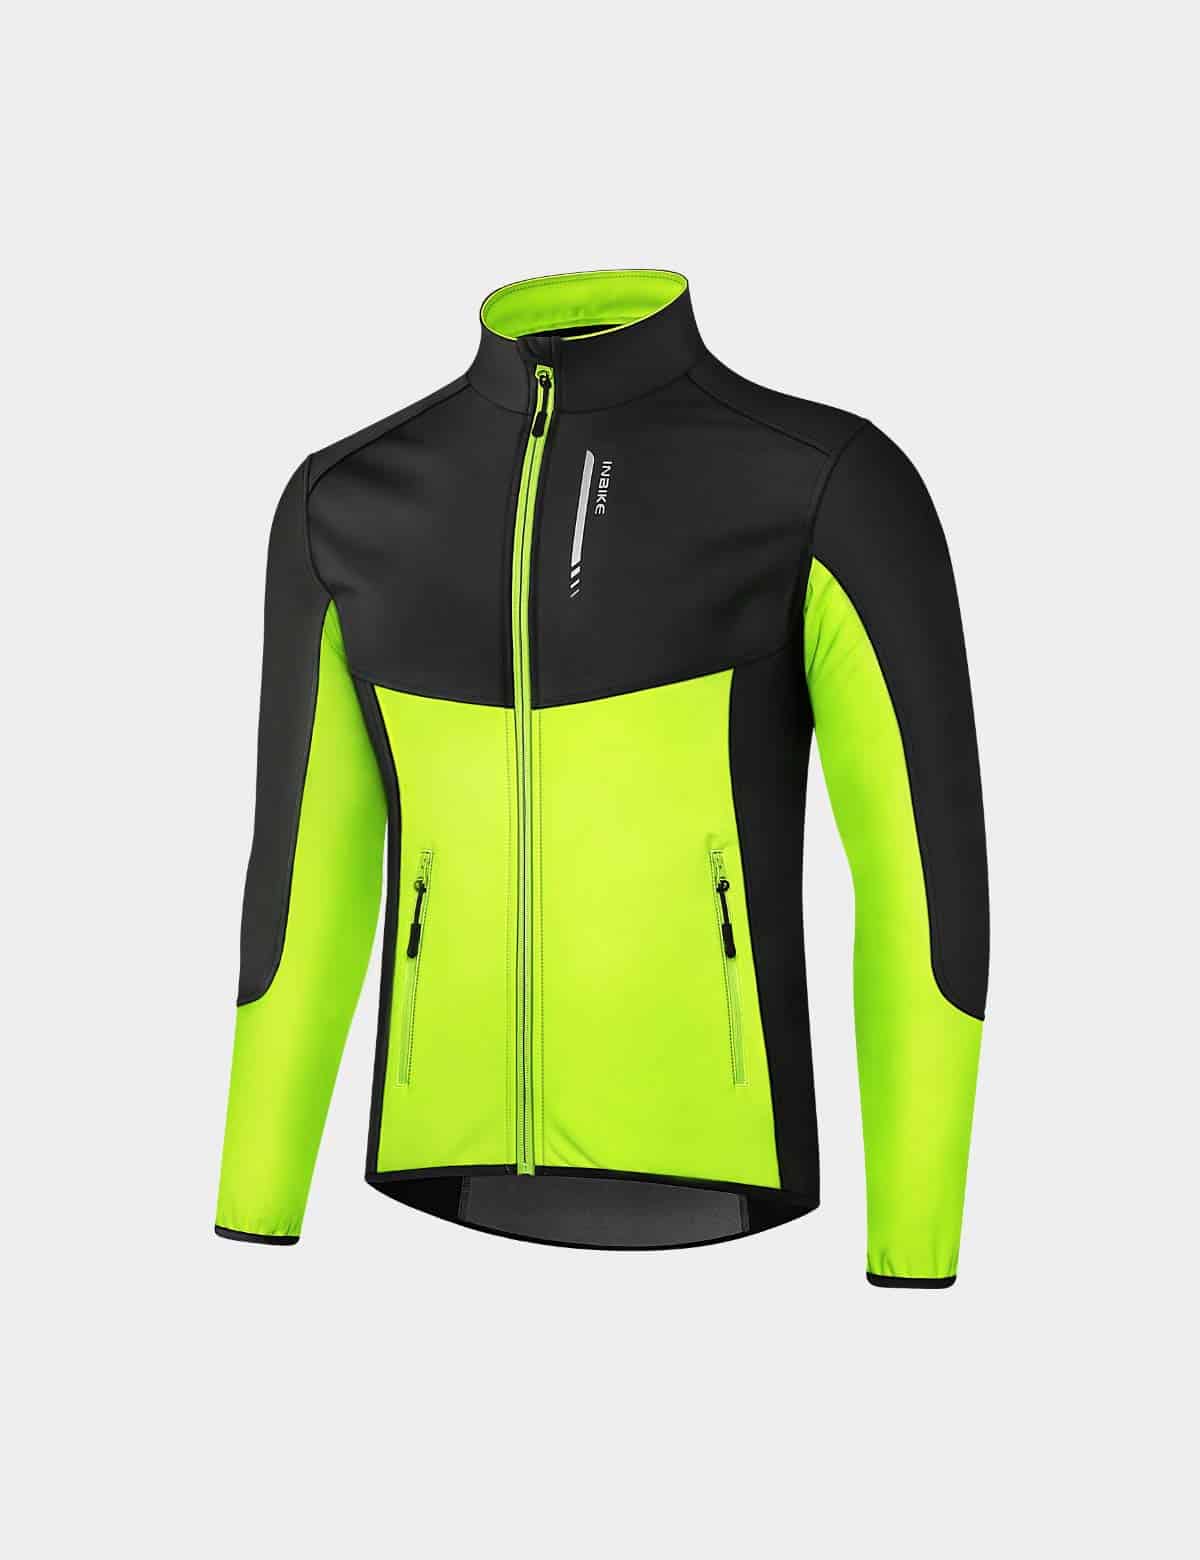 INBIKE Mens Thermal Cycling Jacket Windproof Outdoor Coat